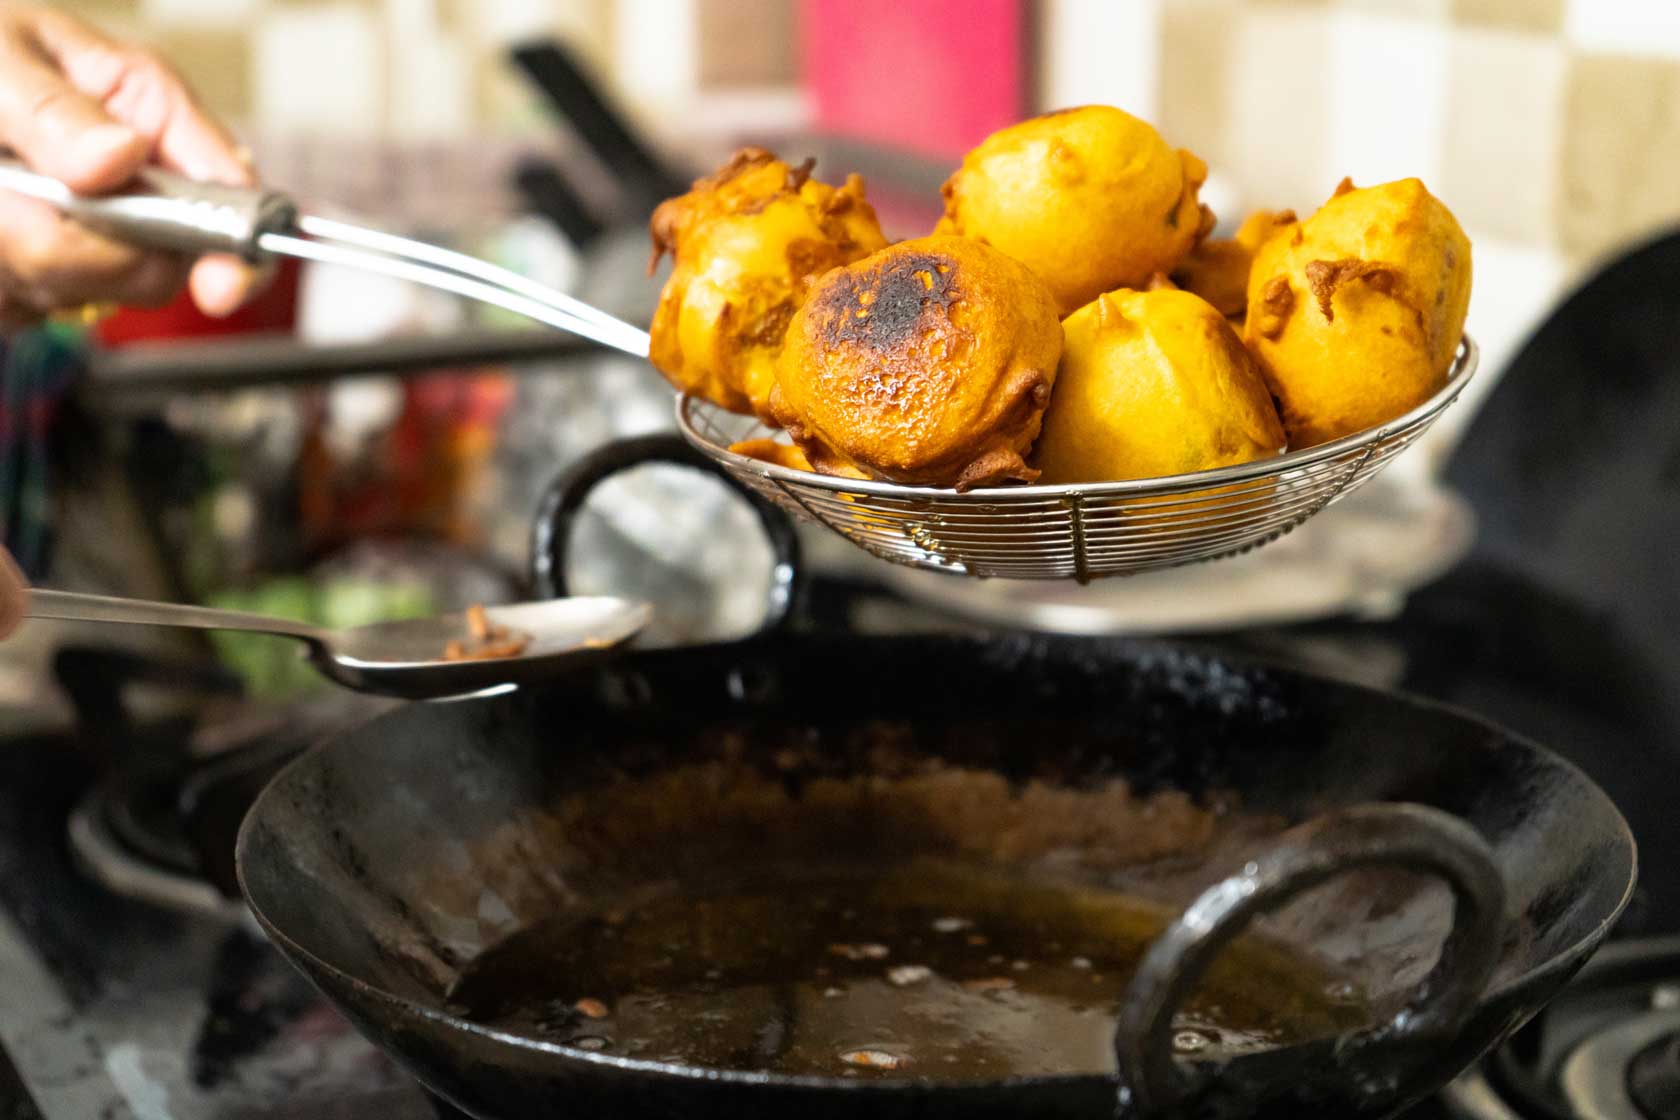 Vada potatoes wrapped in flour being taken out of hot oil after deep frying